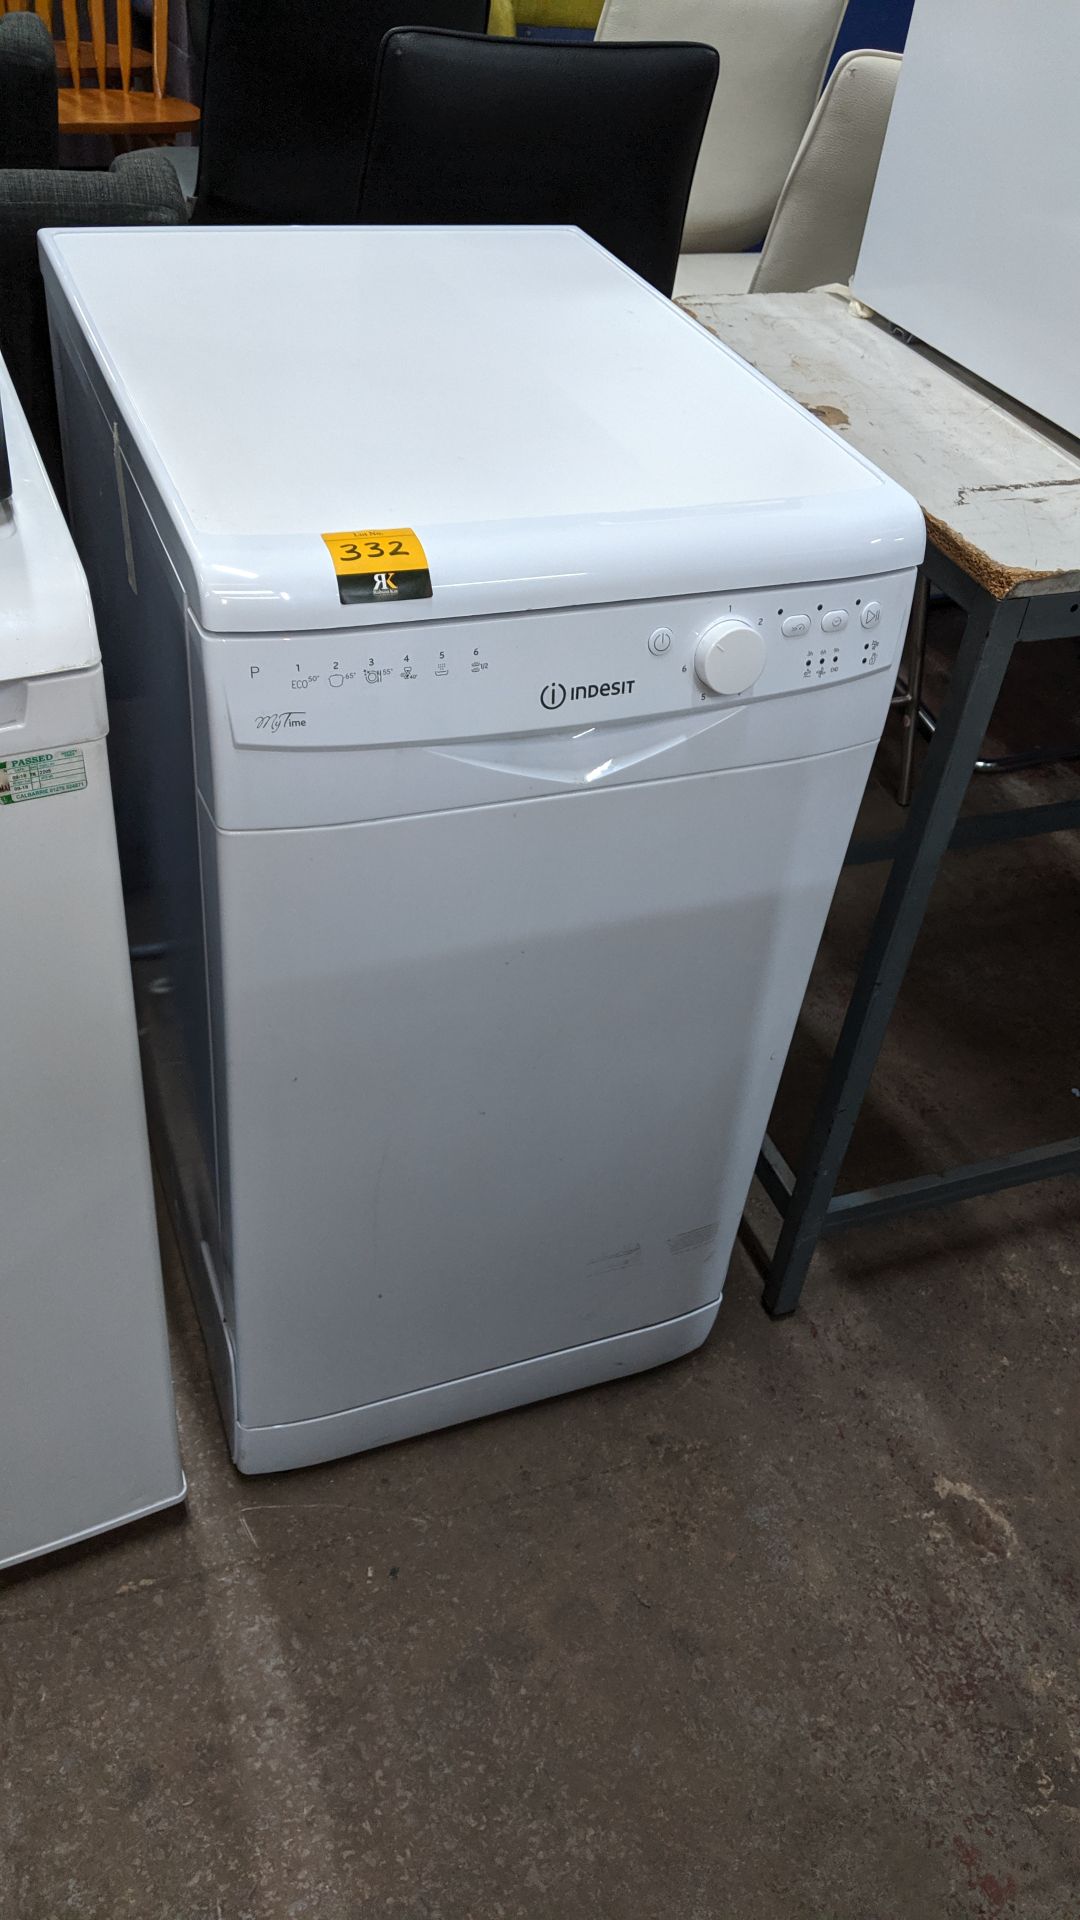 Indesit slimline dishwasher, model DSR 26B1. This is one of a large number of lots used/owned by One - Image 2 of 4